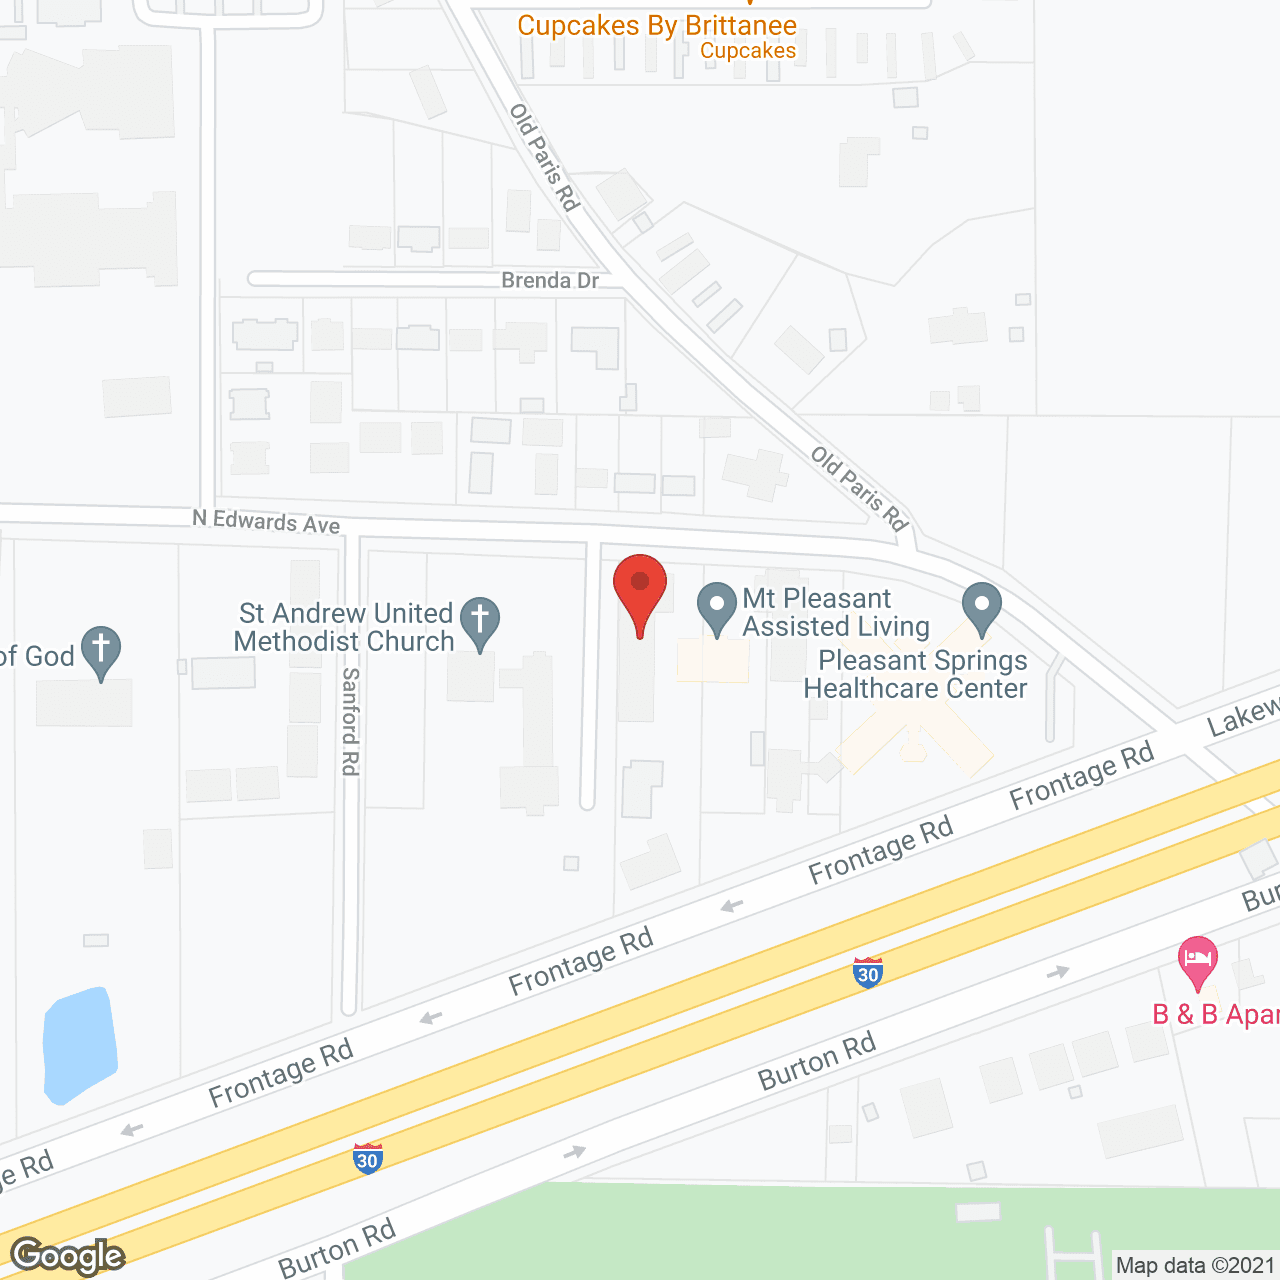 Mount Pleasant Assisted Living in google map